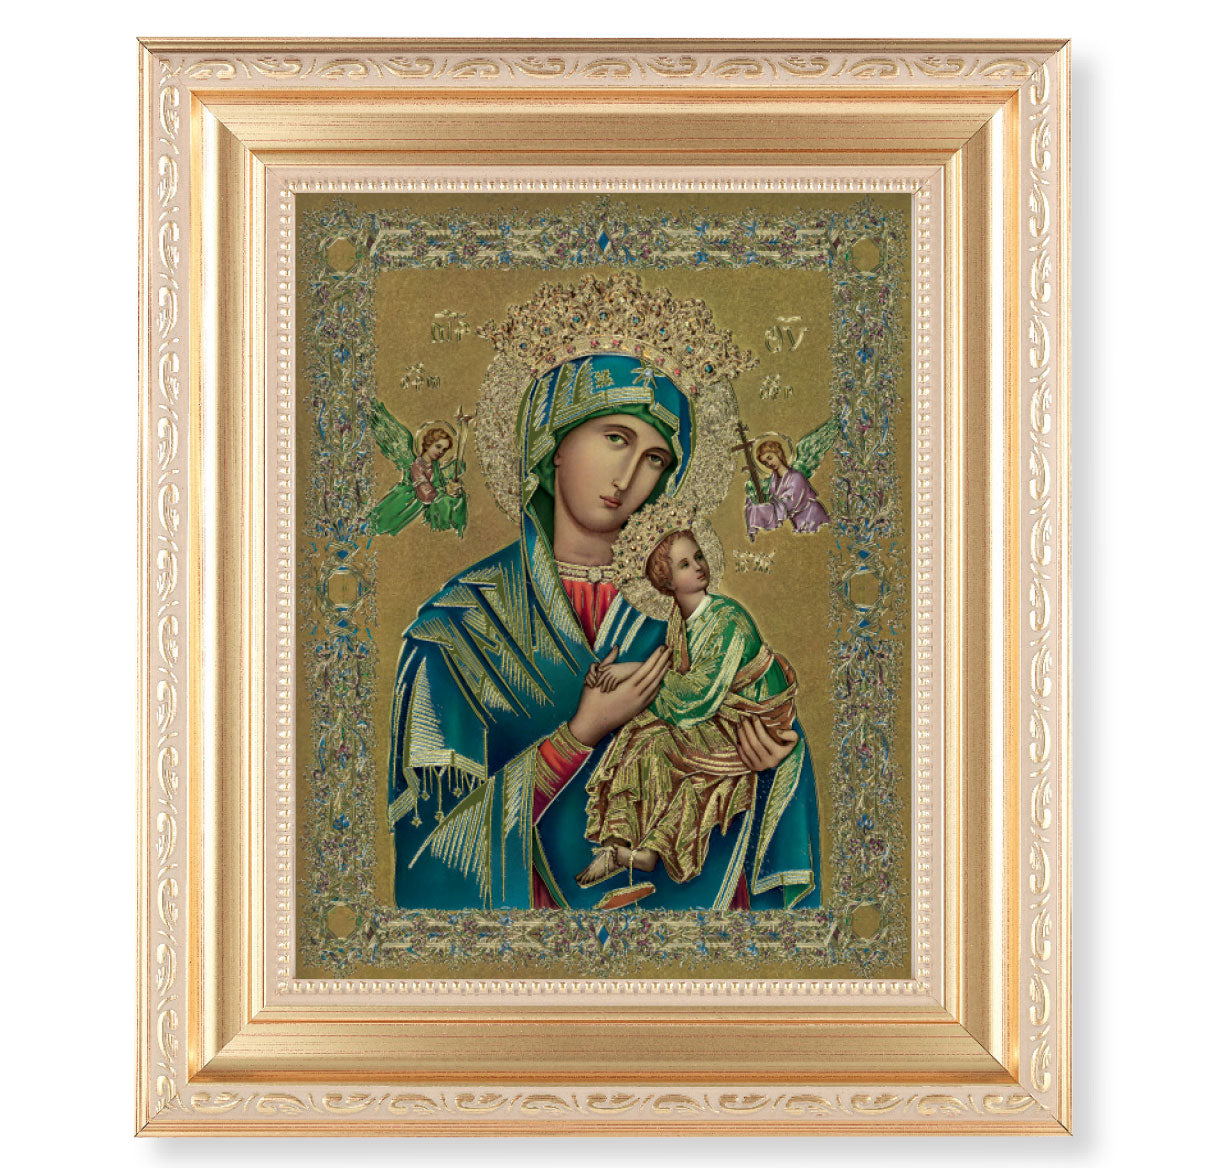 Our Lady of Perpetual Help Gold Framed Art